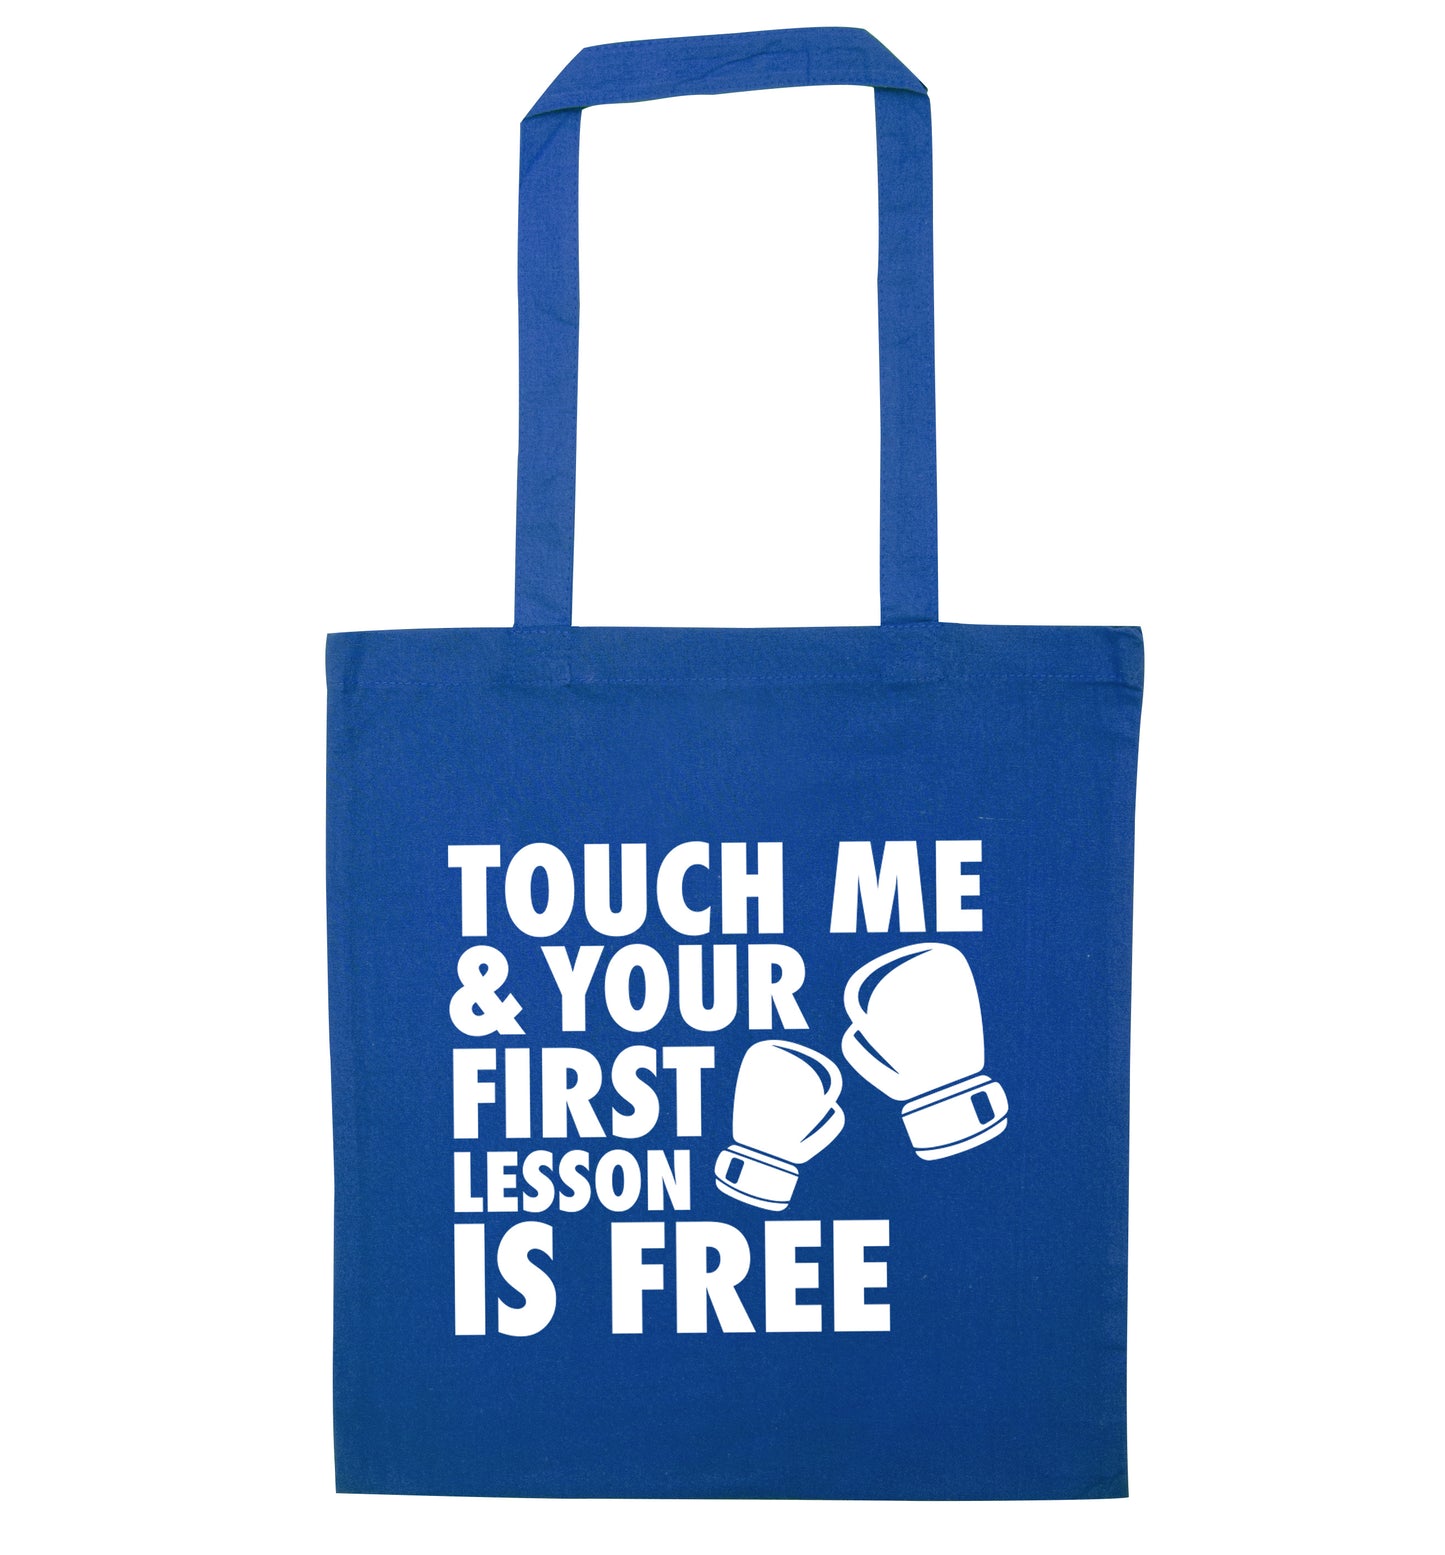 Touch me and your First Lesson is Free  blue tote bag